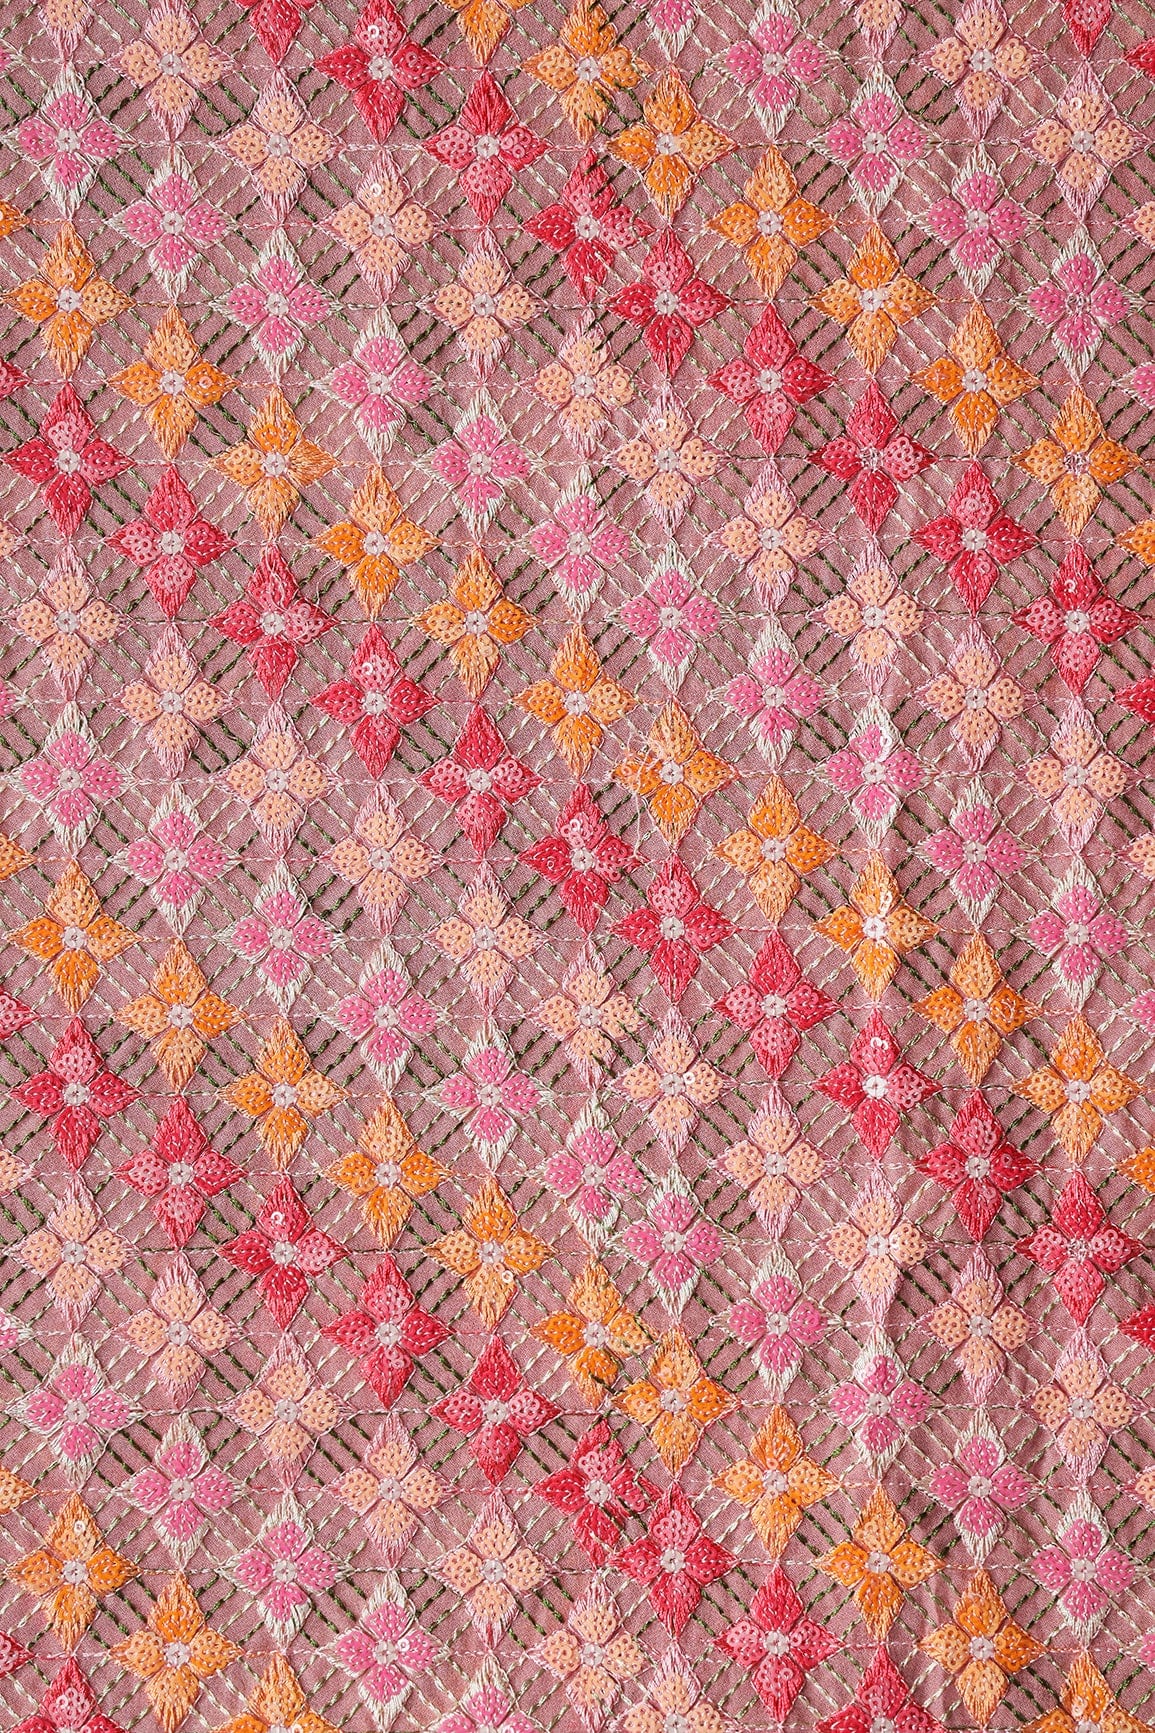 doeraa Embroidery Fabrics 1 Meter Cut Meter Of Gorgeous Multi Thread With Sequins Geometric Embroidery On Thulian Pink Viscose Georgette Fabric